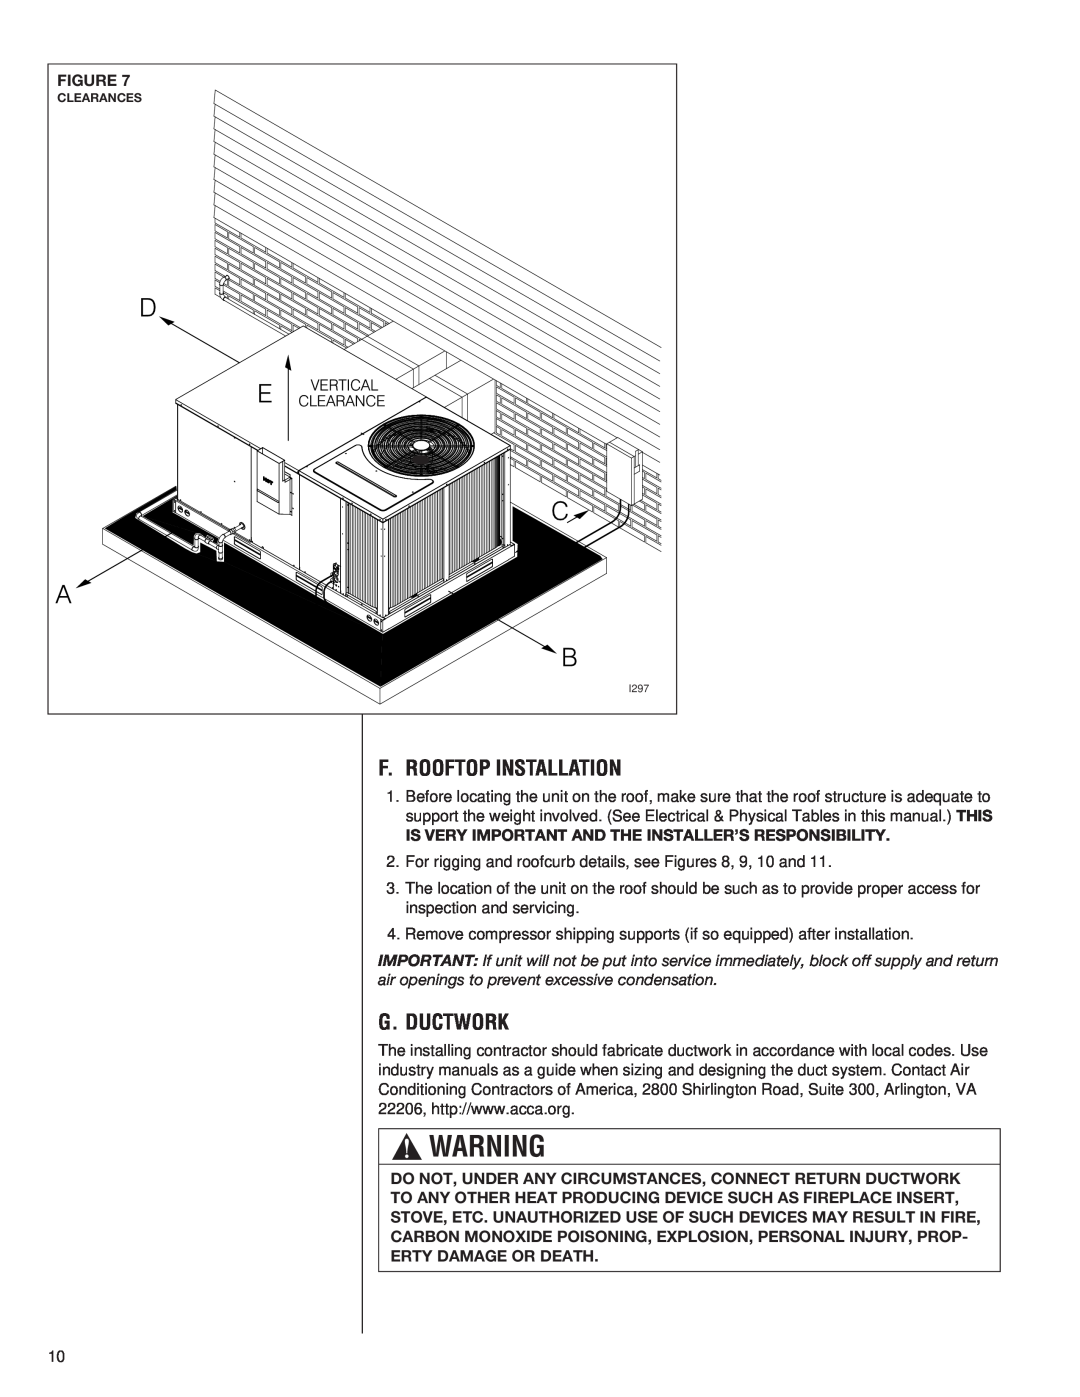 Heat Controller A-13 installation instructions F. Rooftop Installation, G. Ductwork 